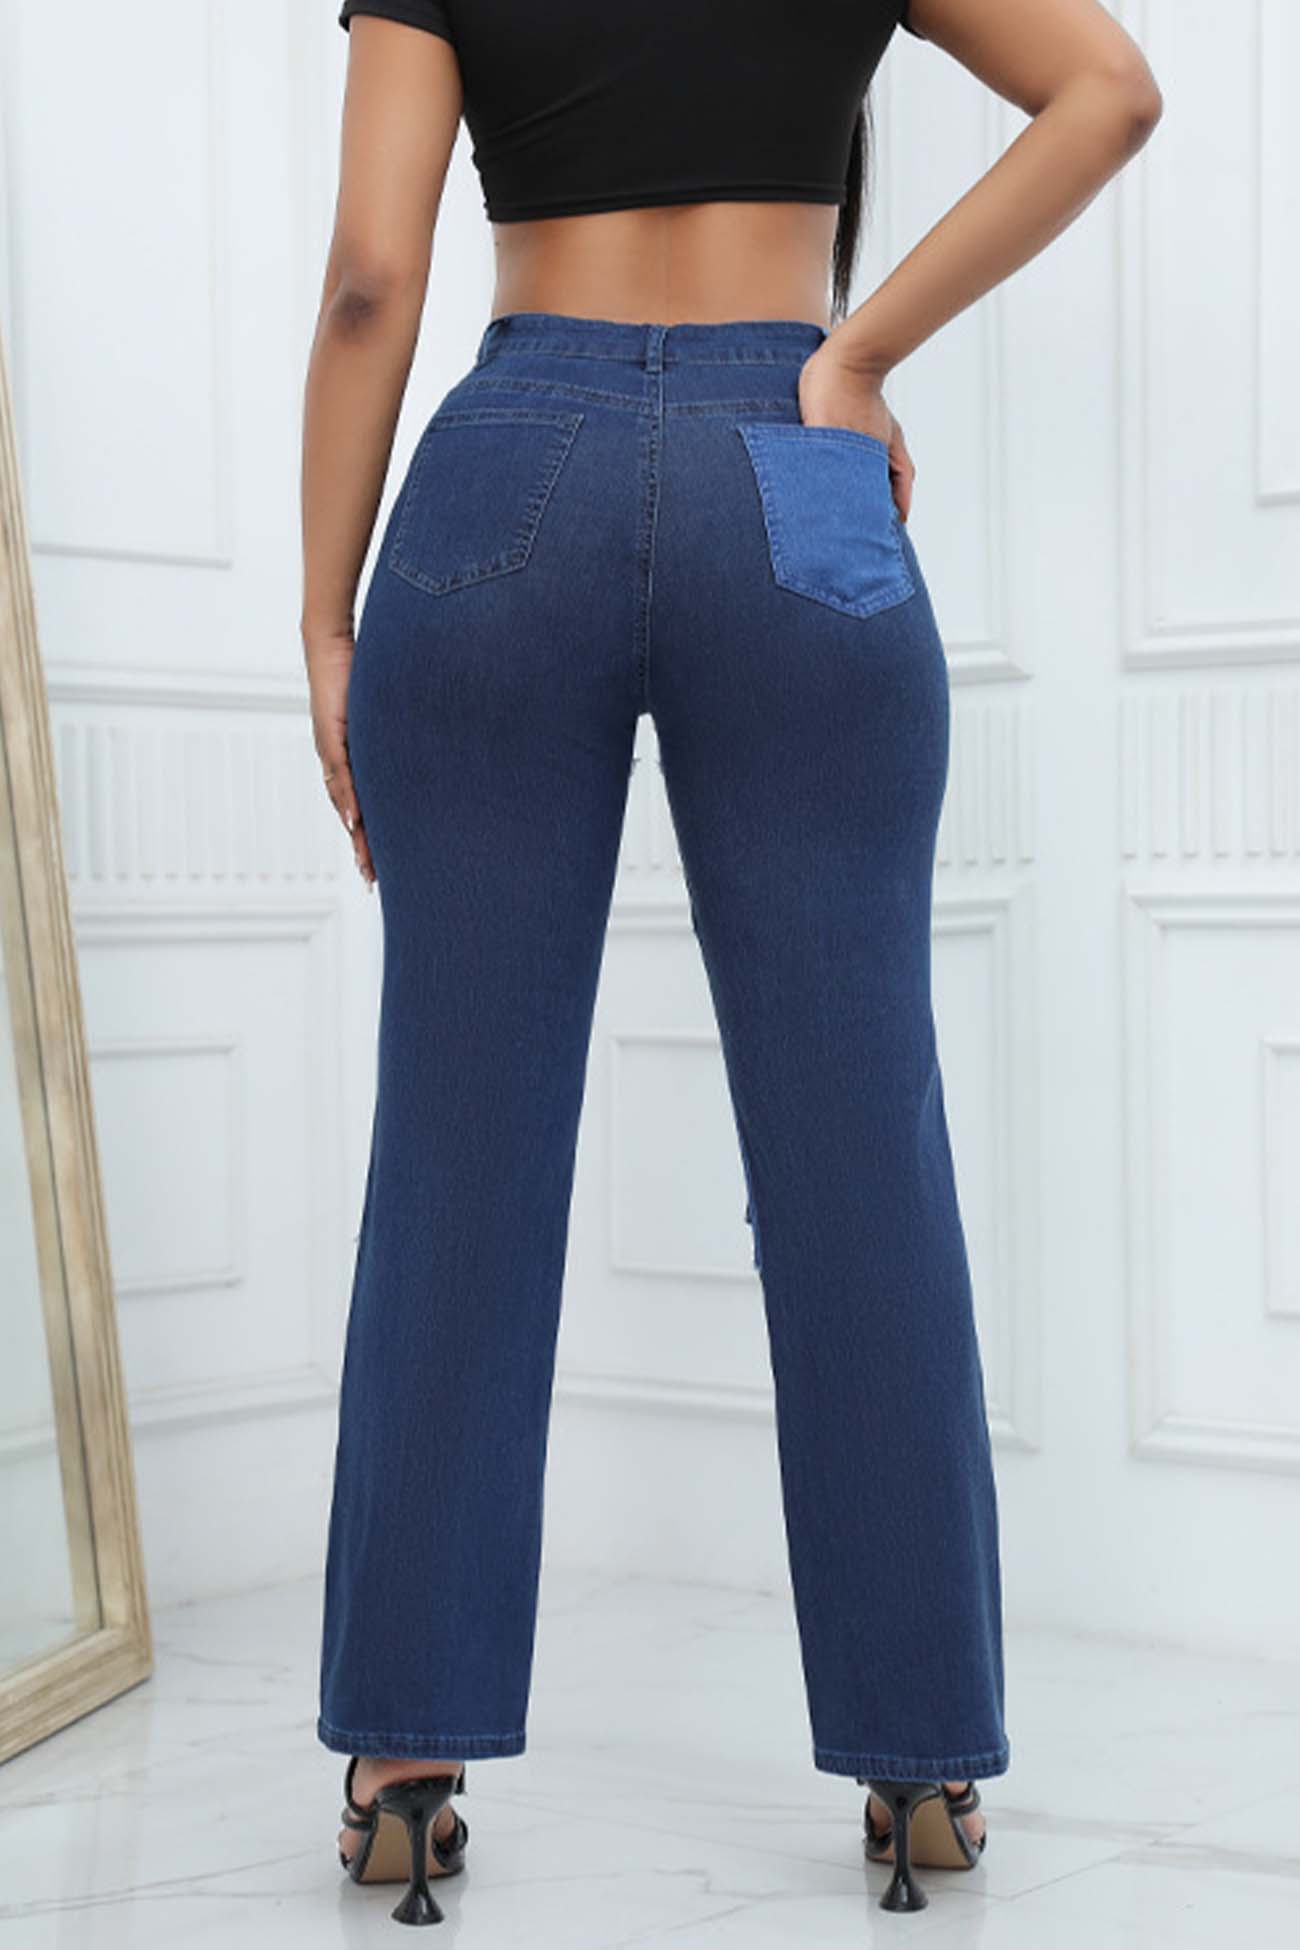 Contrast Patchwork High Waisted Jeans